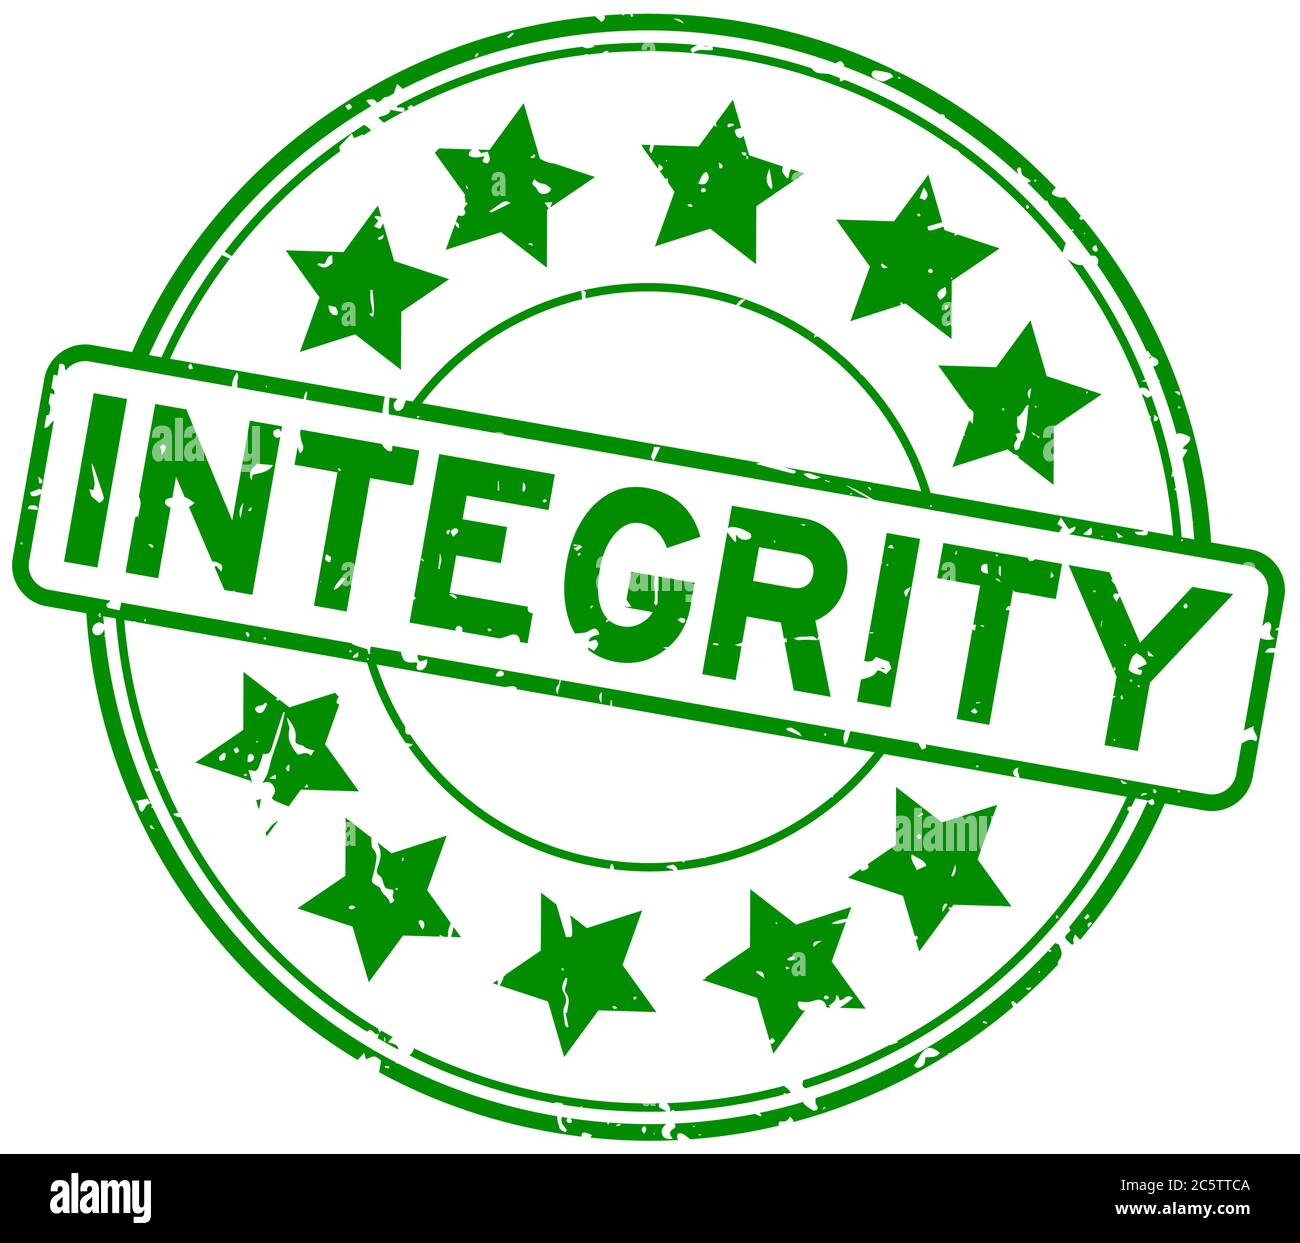 Grunge green integrity word with star icon rubber seal stamp on white background Stock Vector